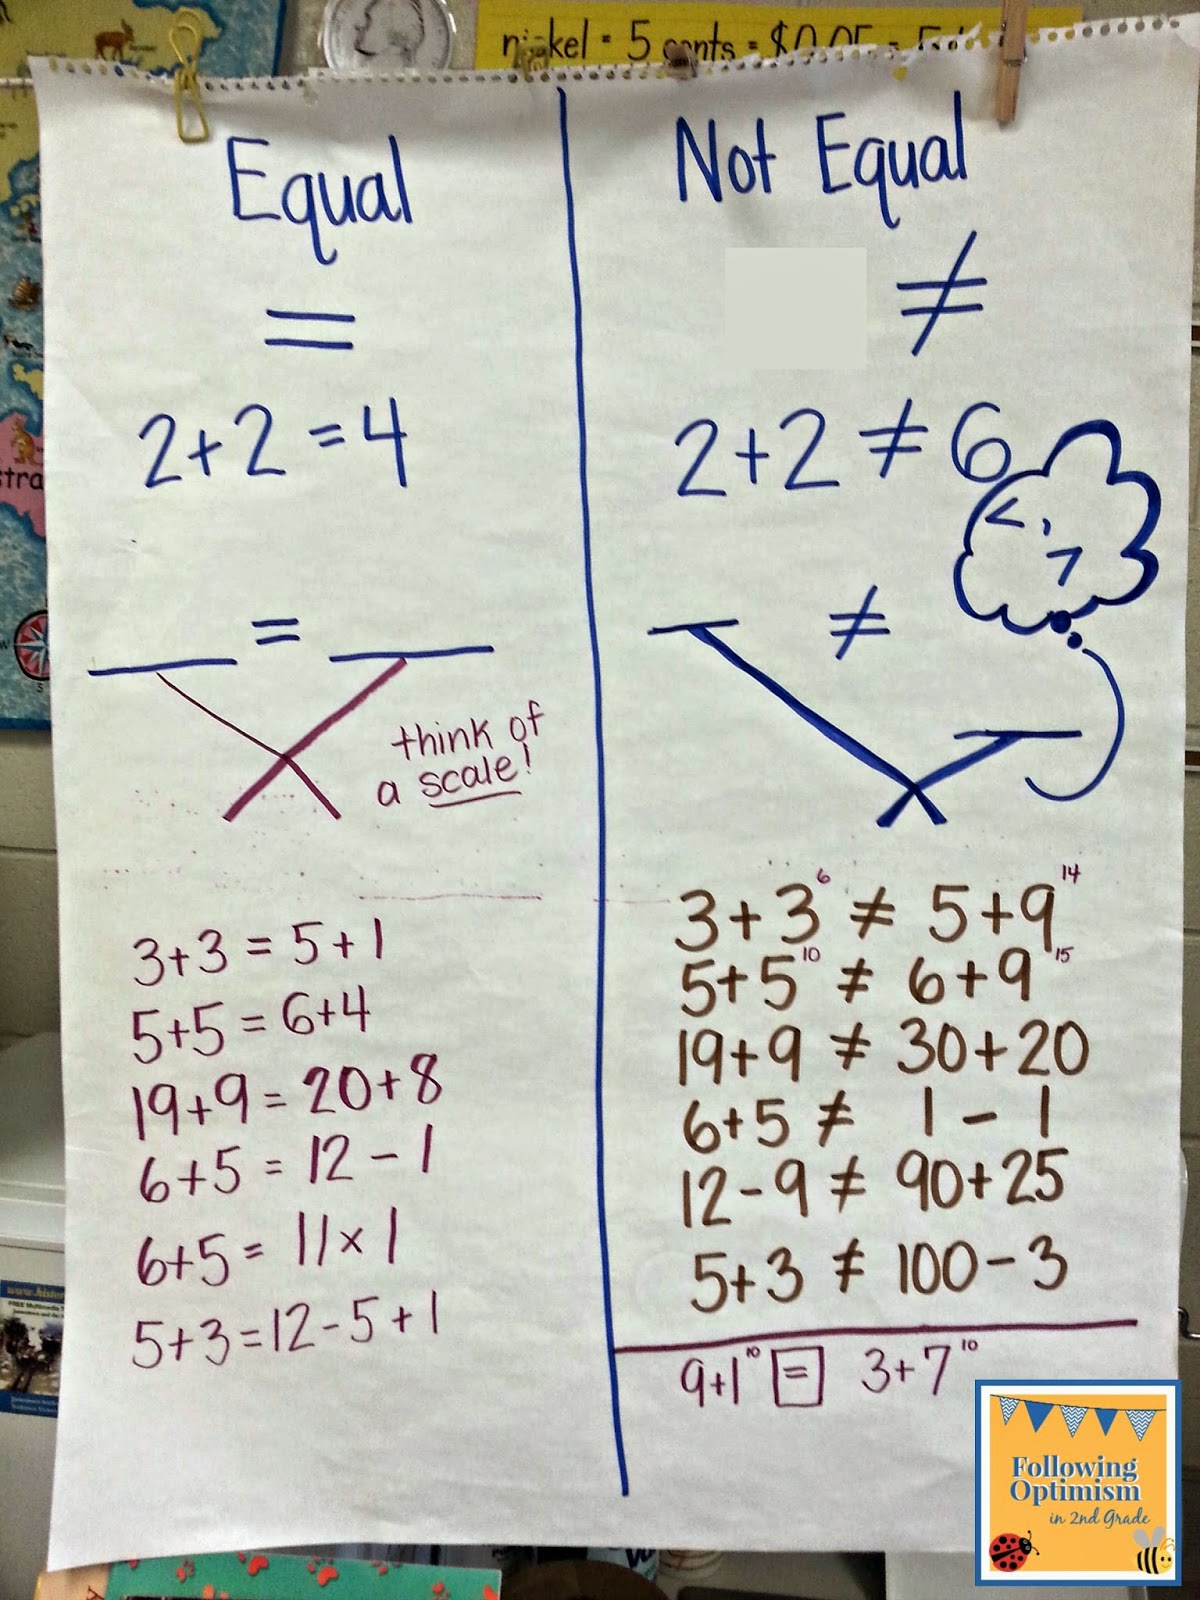 Following Optimism in 2nd Grade: Equal, or not equal...that is the